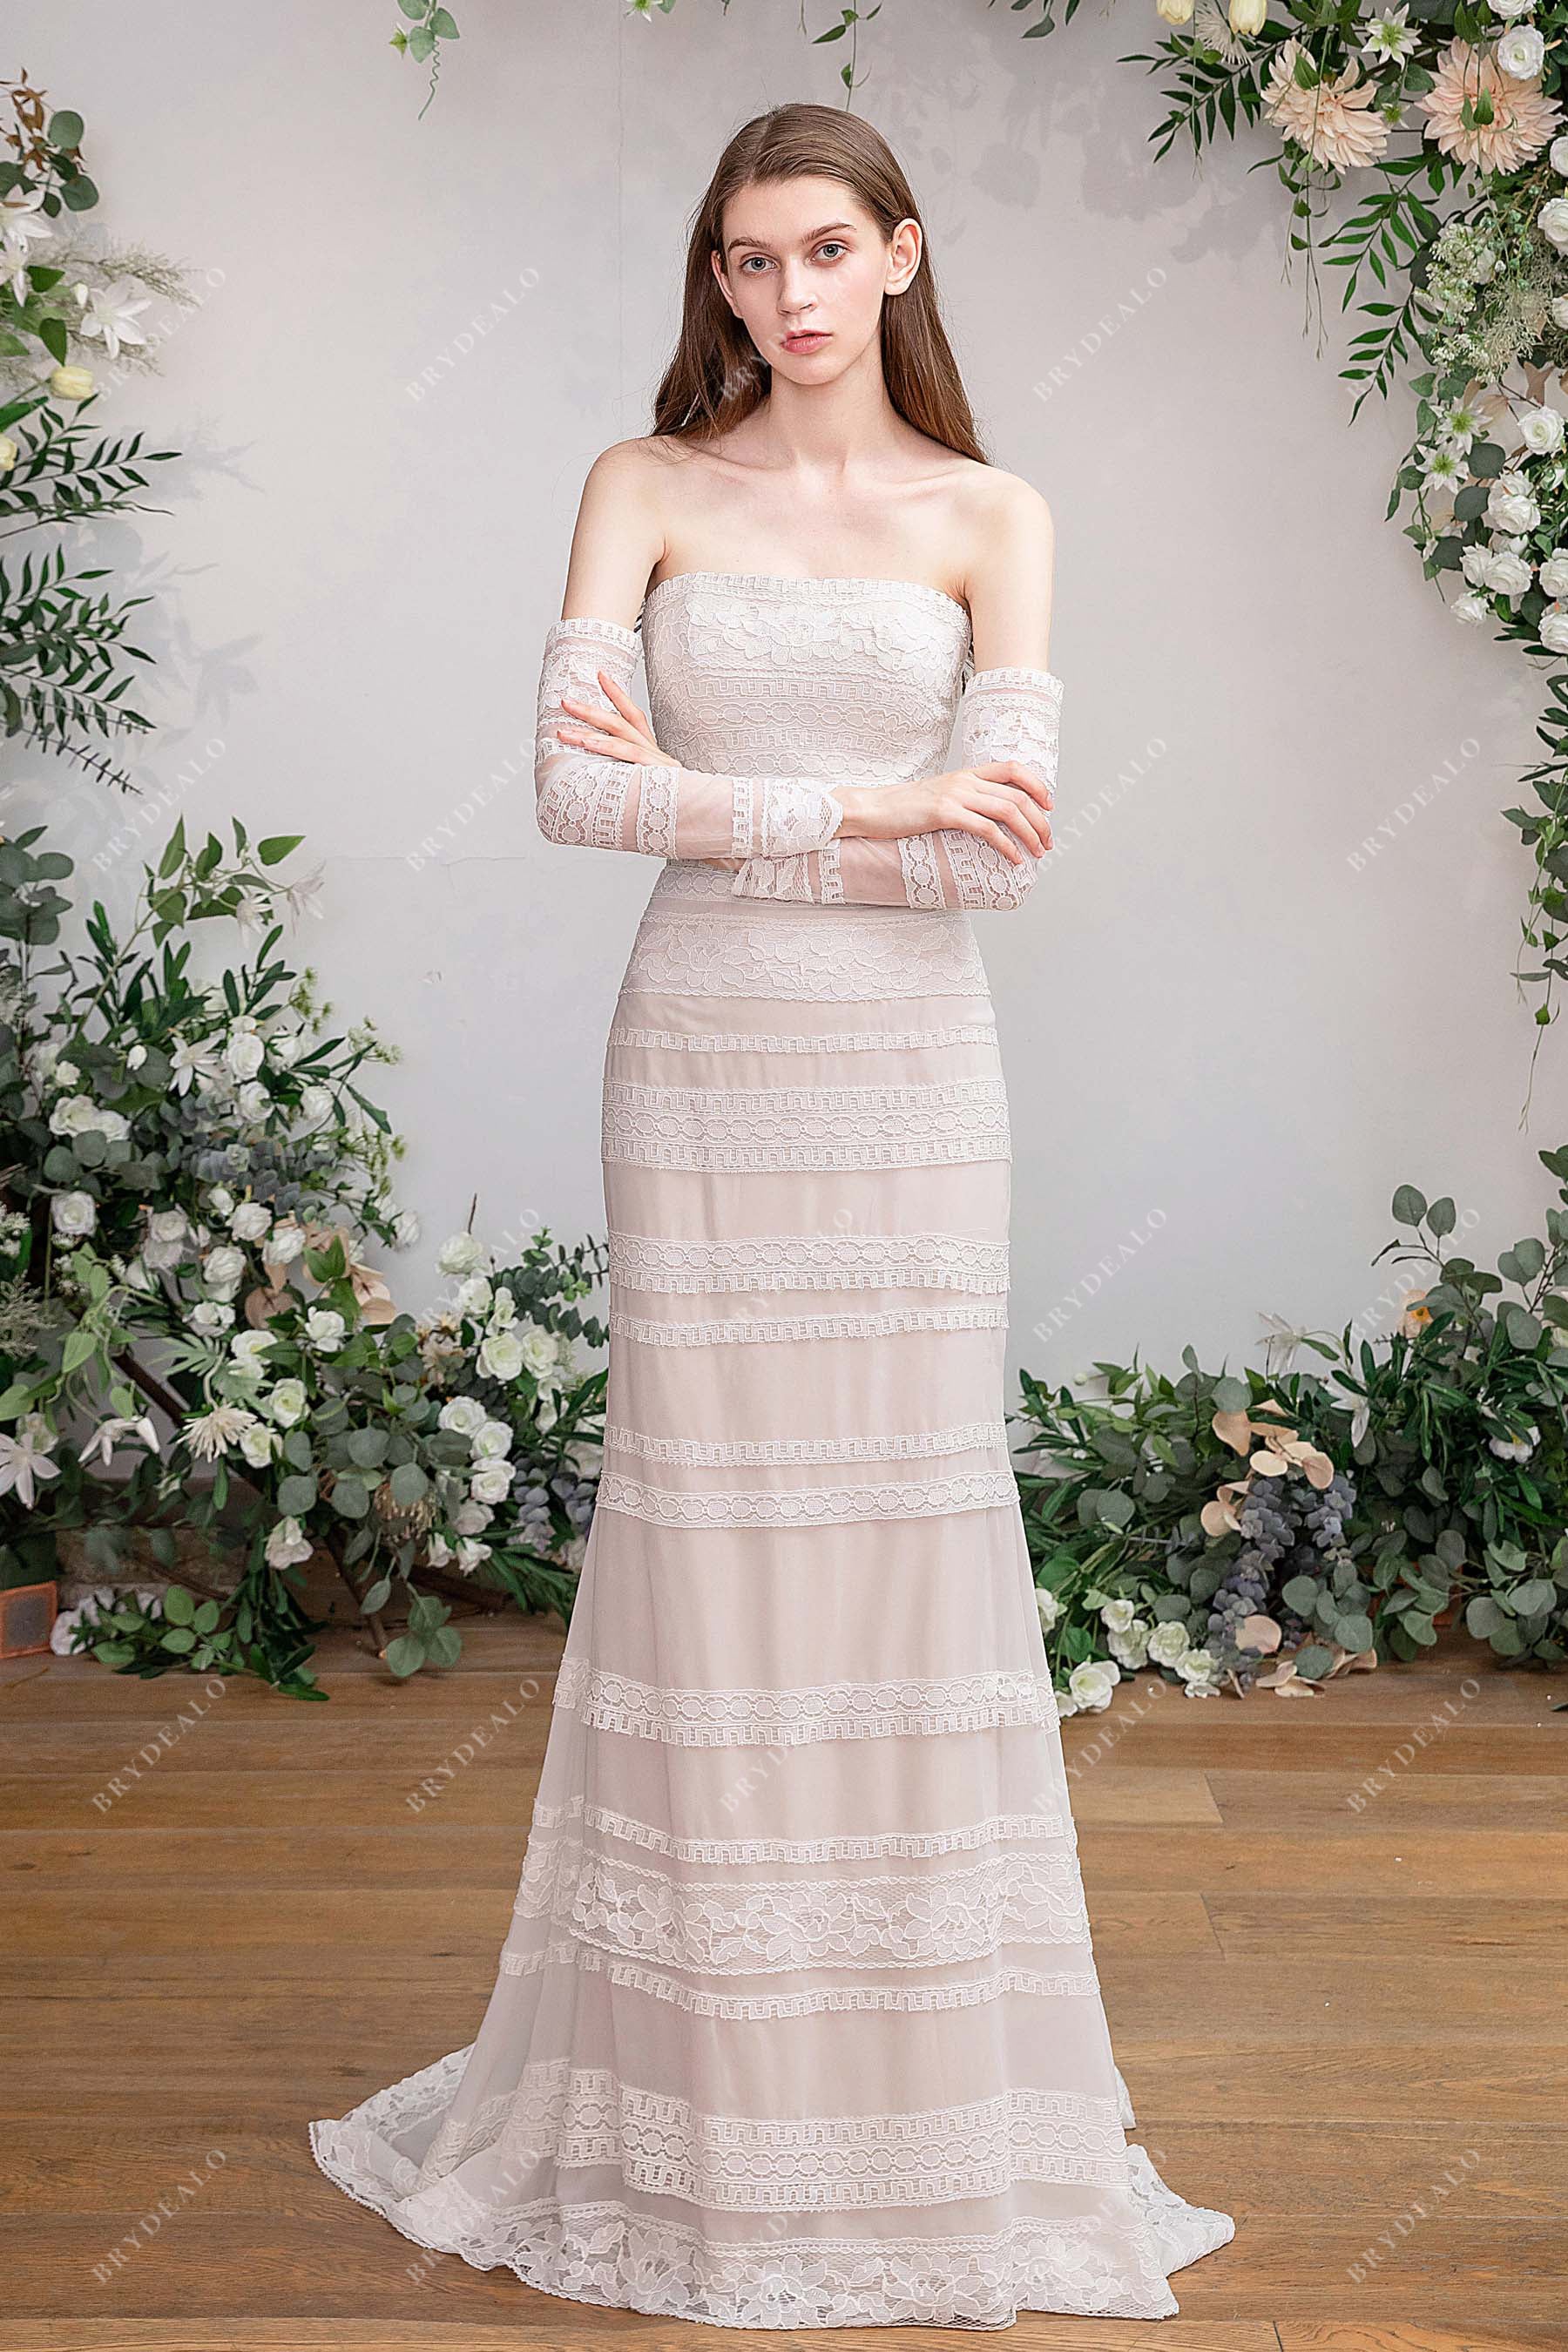 DAINTY AND DELICATE DETACHABLE SLEEVES | Dream Dresses by P.M.N.